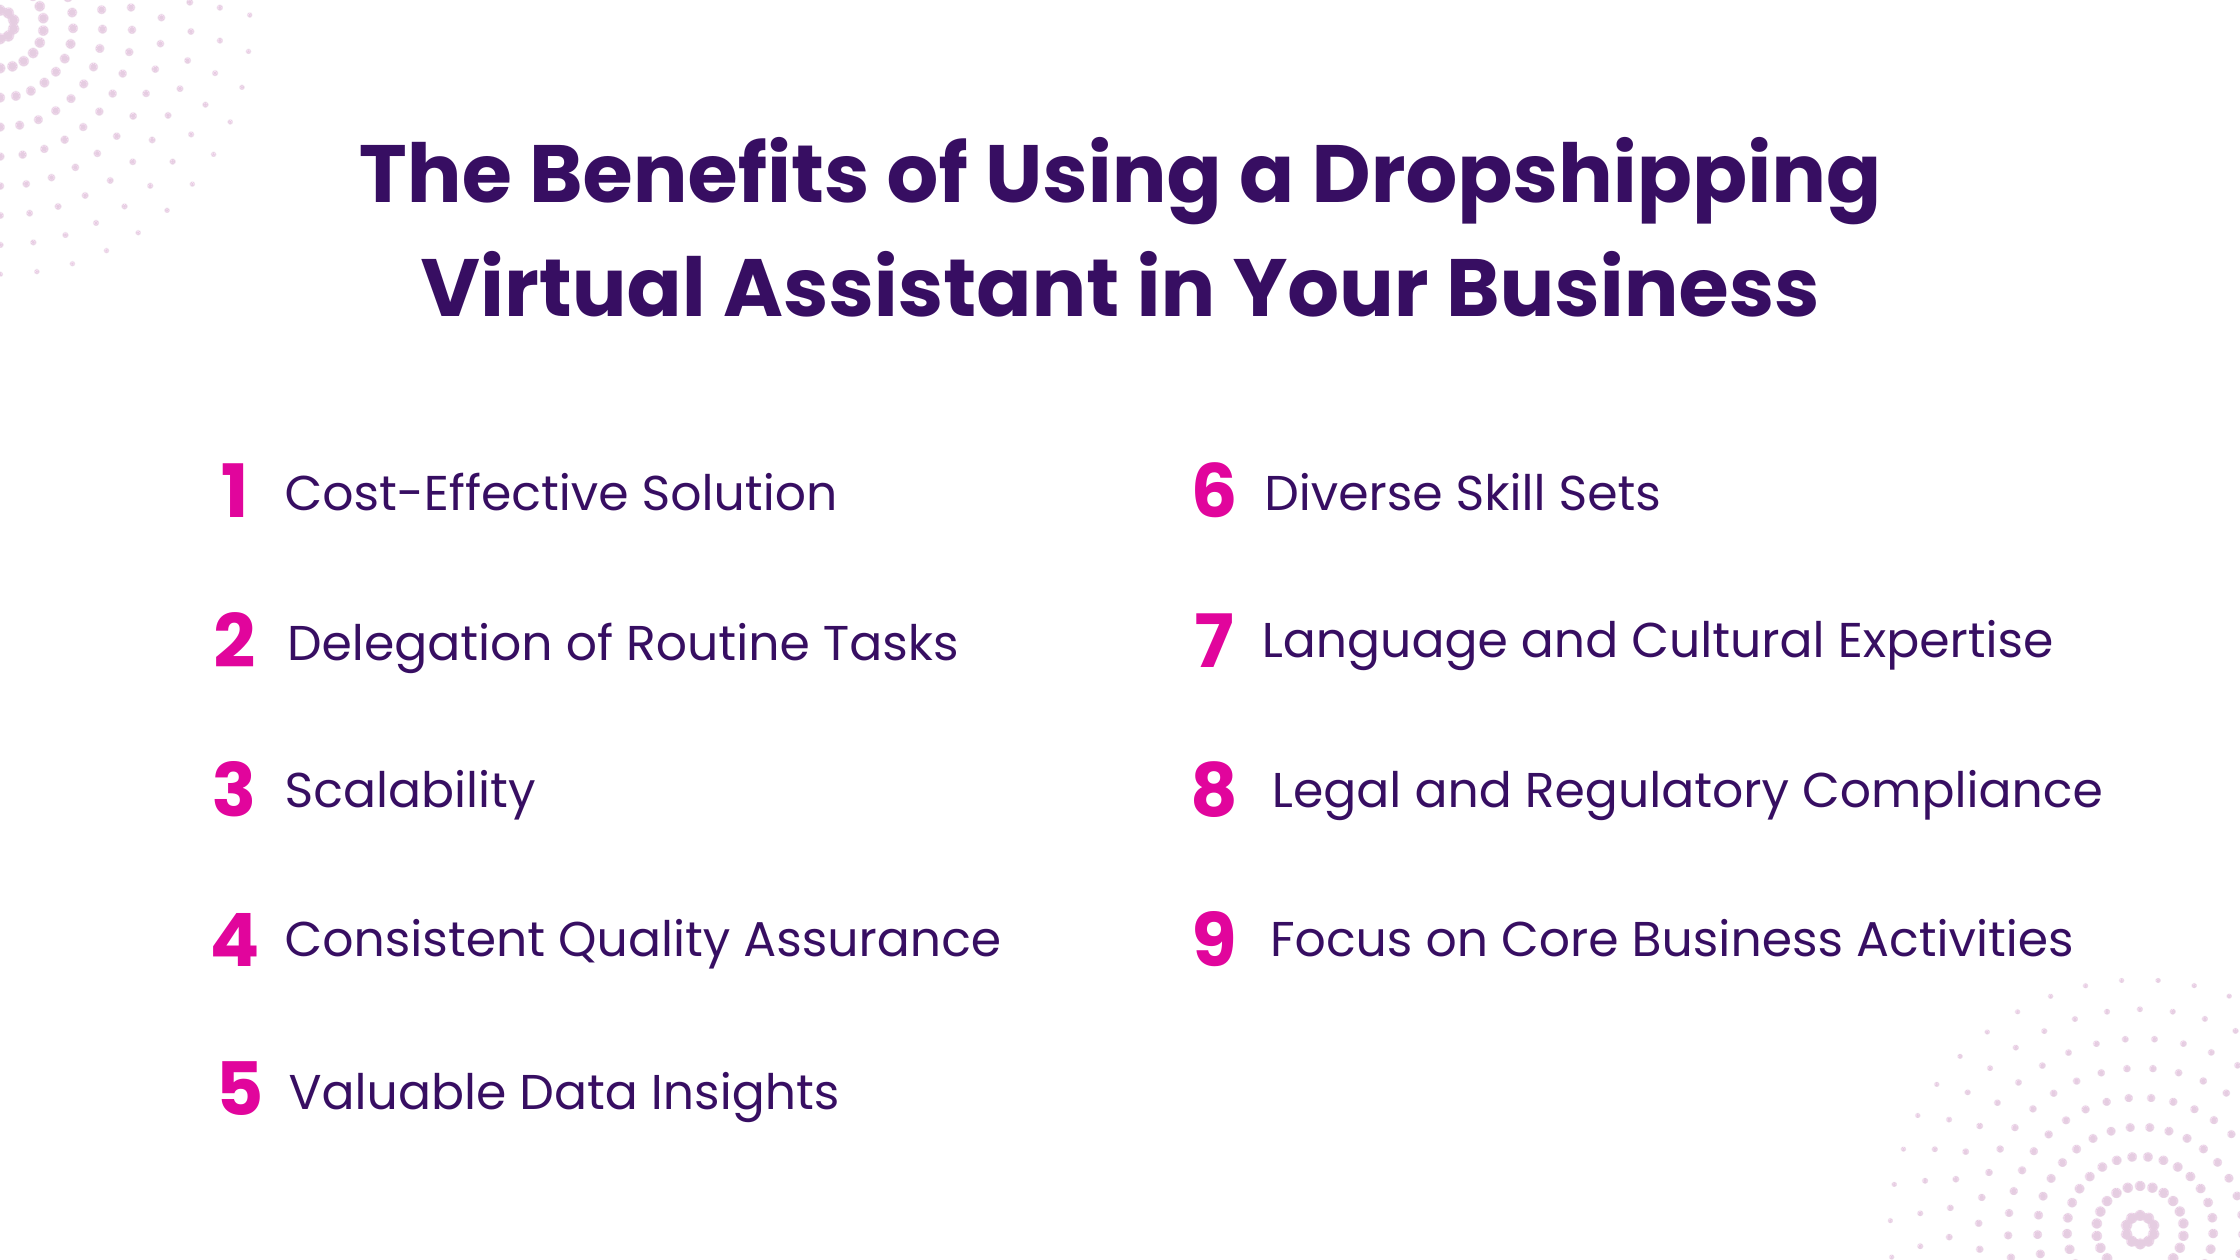 The Benefits of Using a Dropshipping Virtual Assistant in Your Business